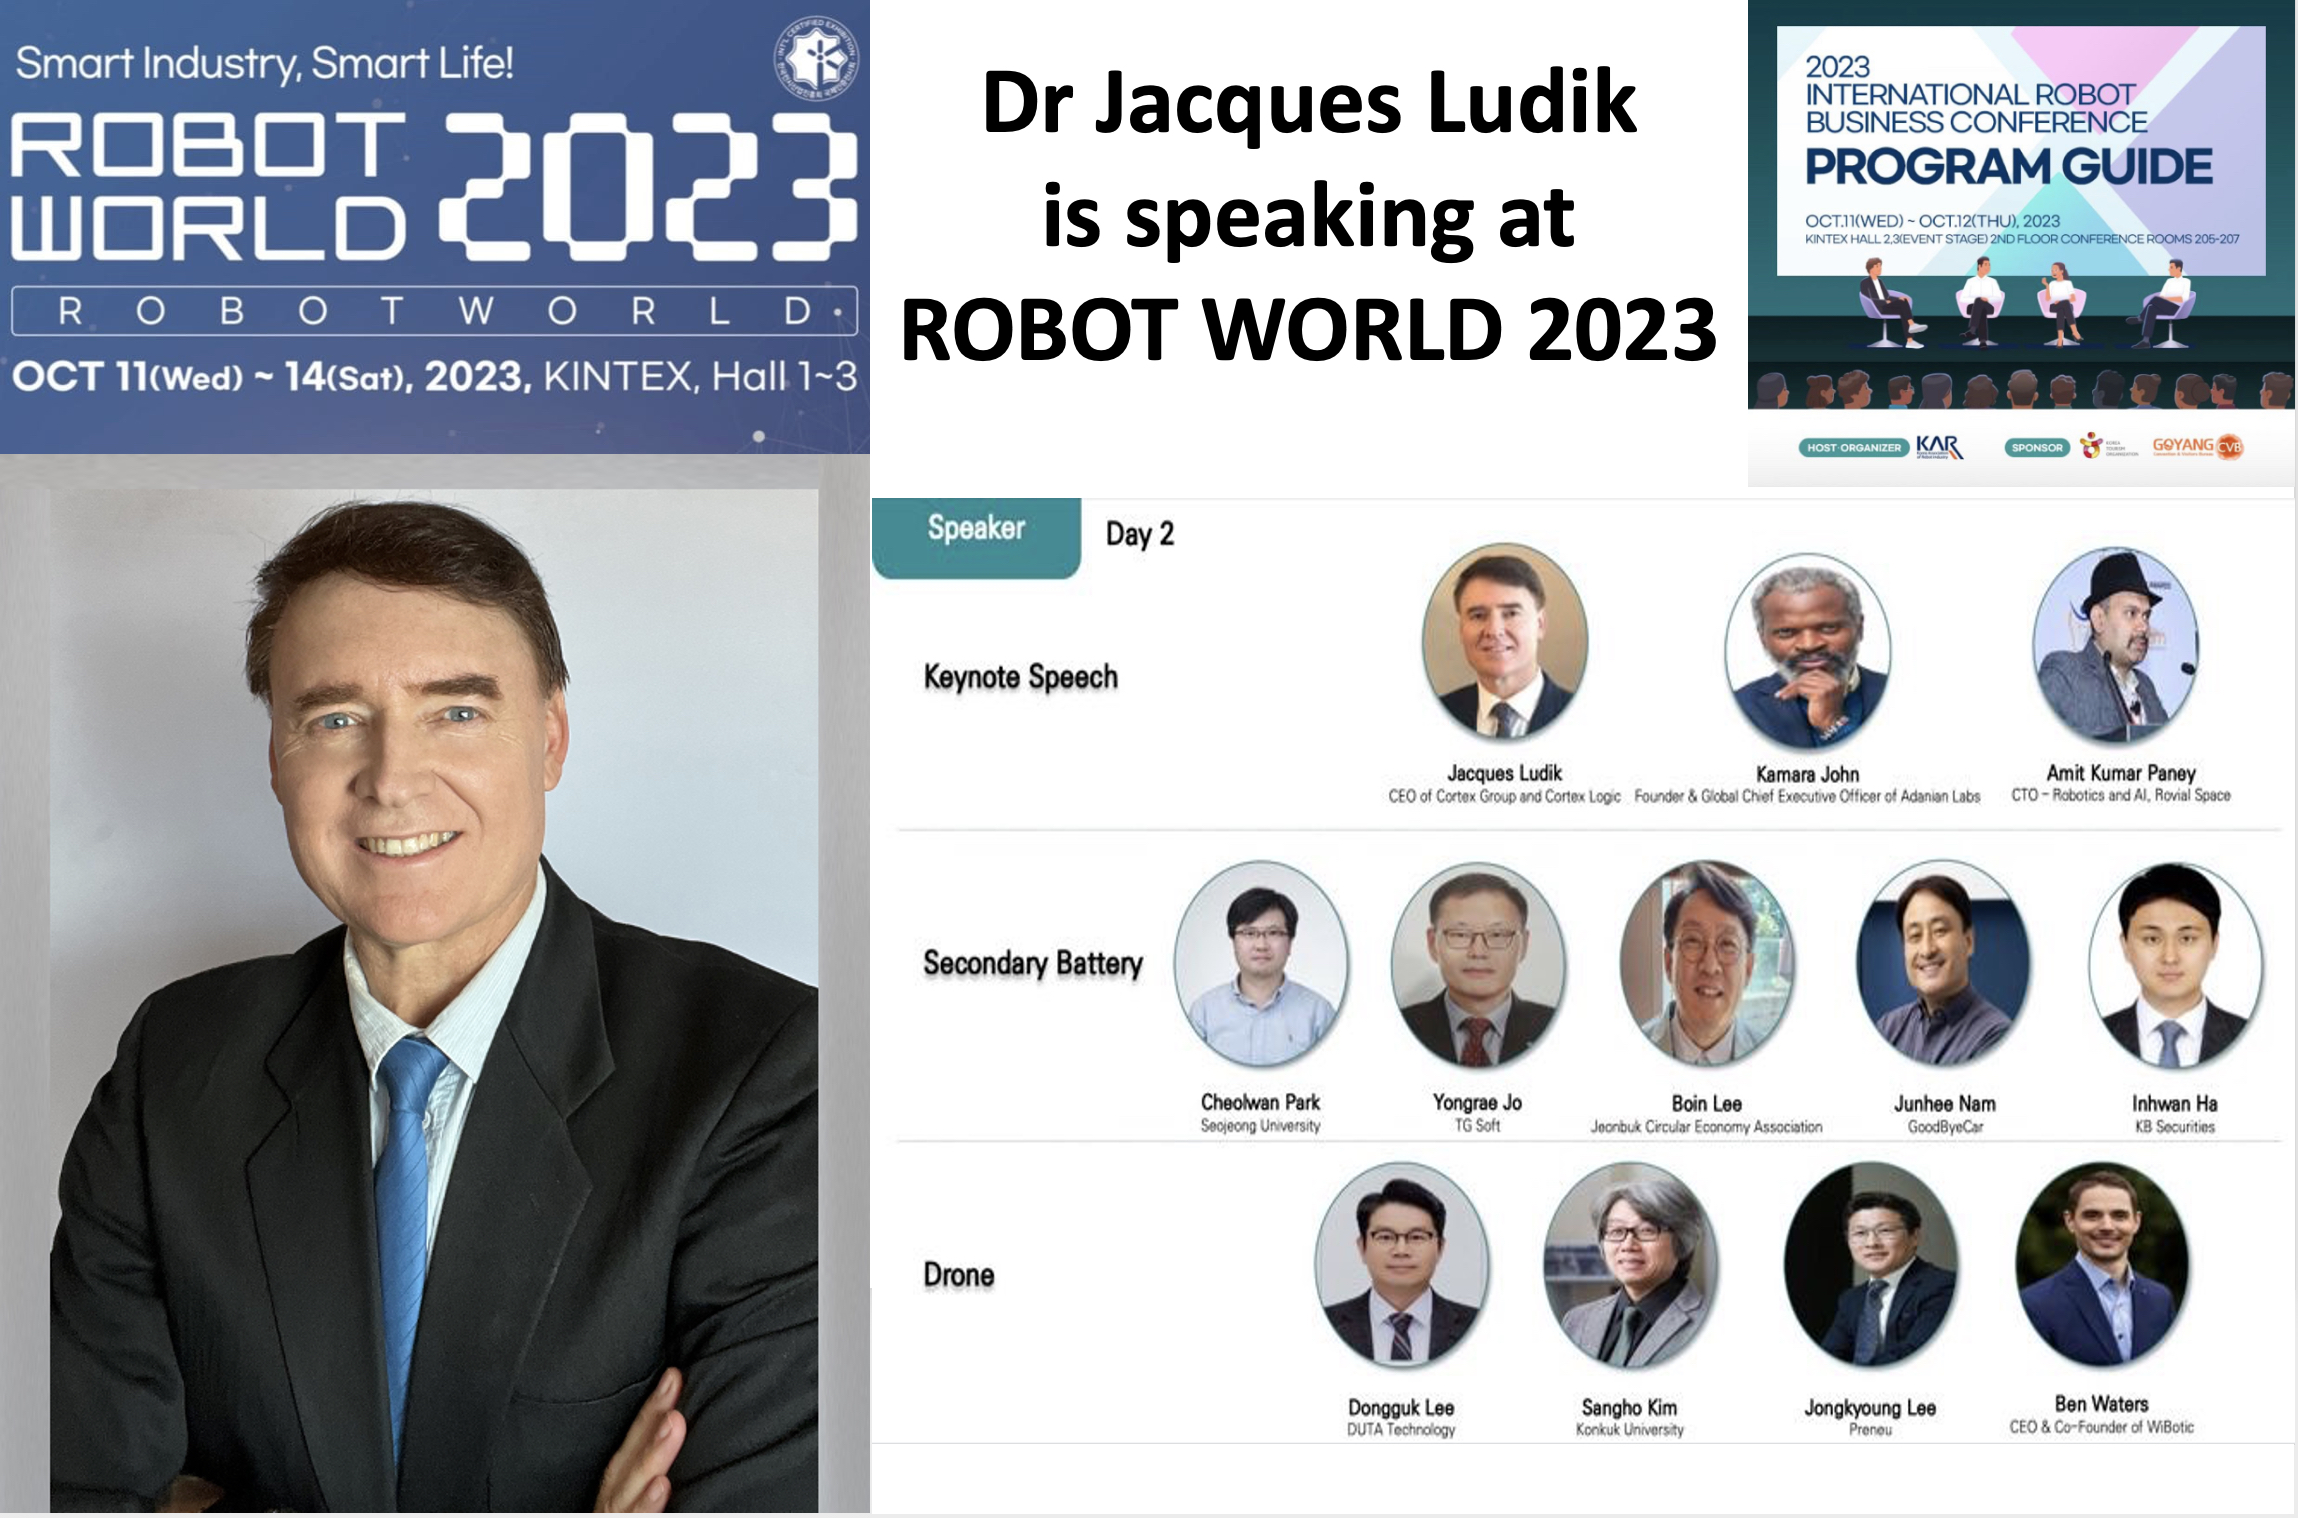 Pushing AI Innovation to Develop State-of-the-art Personalized AI, Intelligent Agents and Robots at ROBOT WORLD 2023